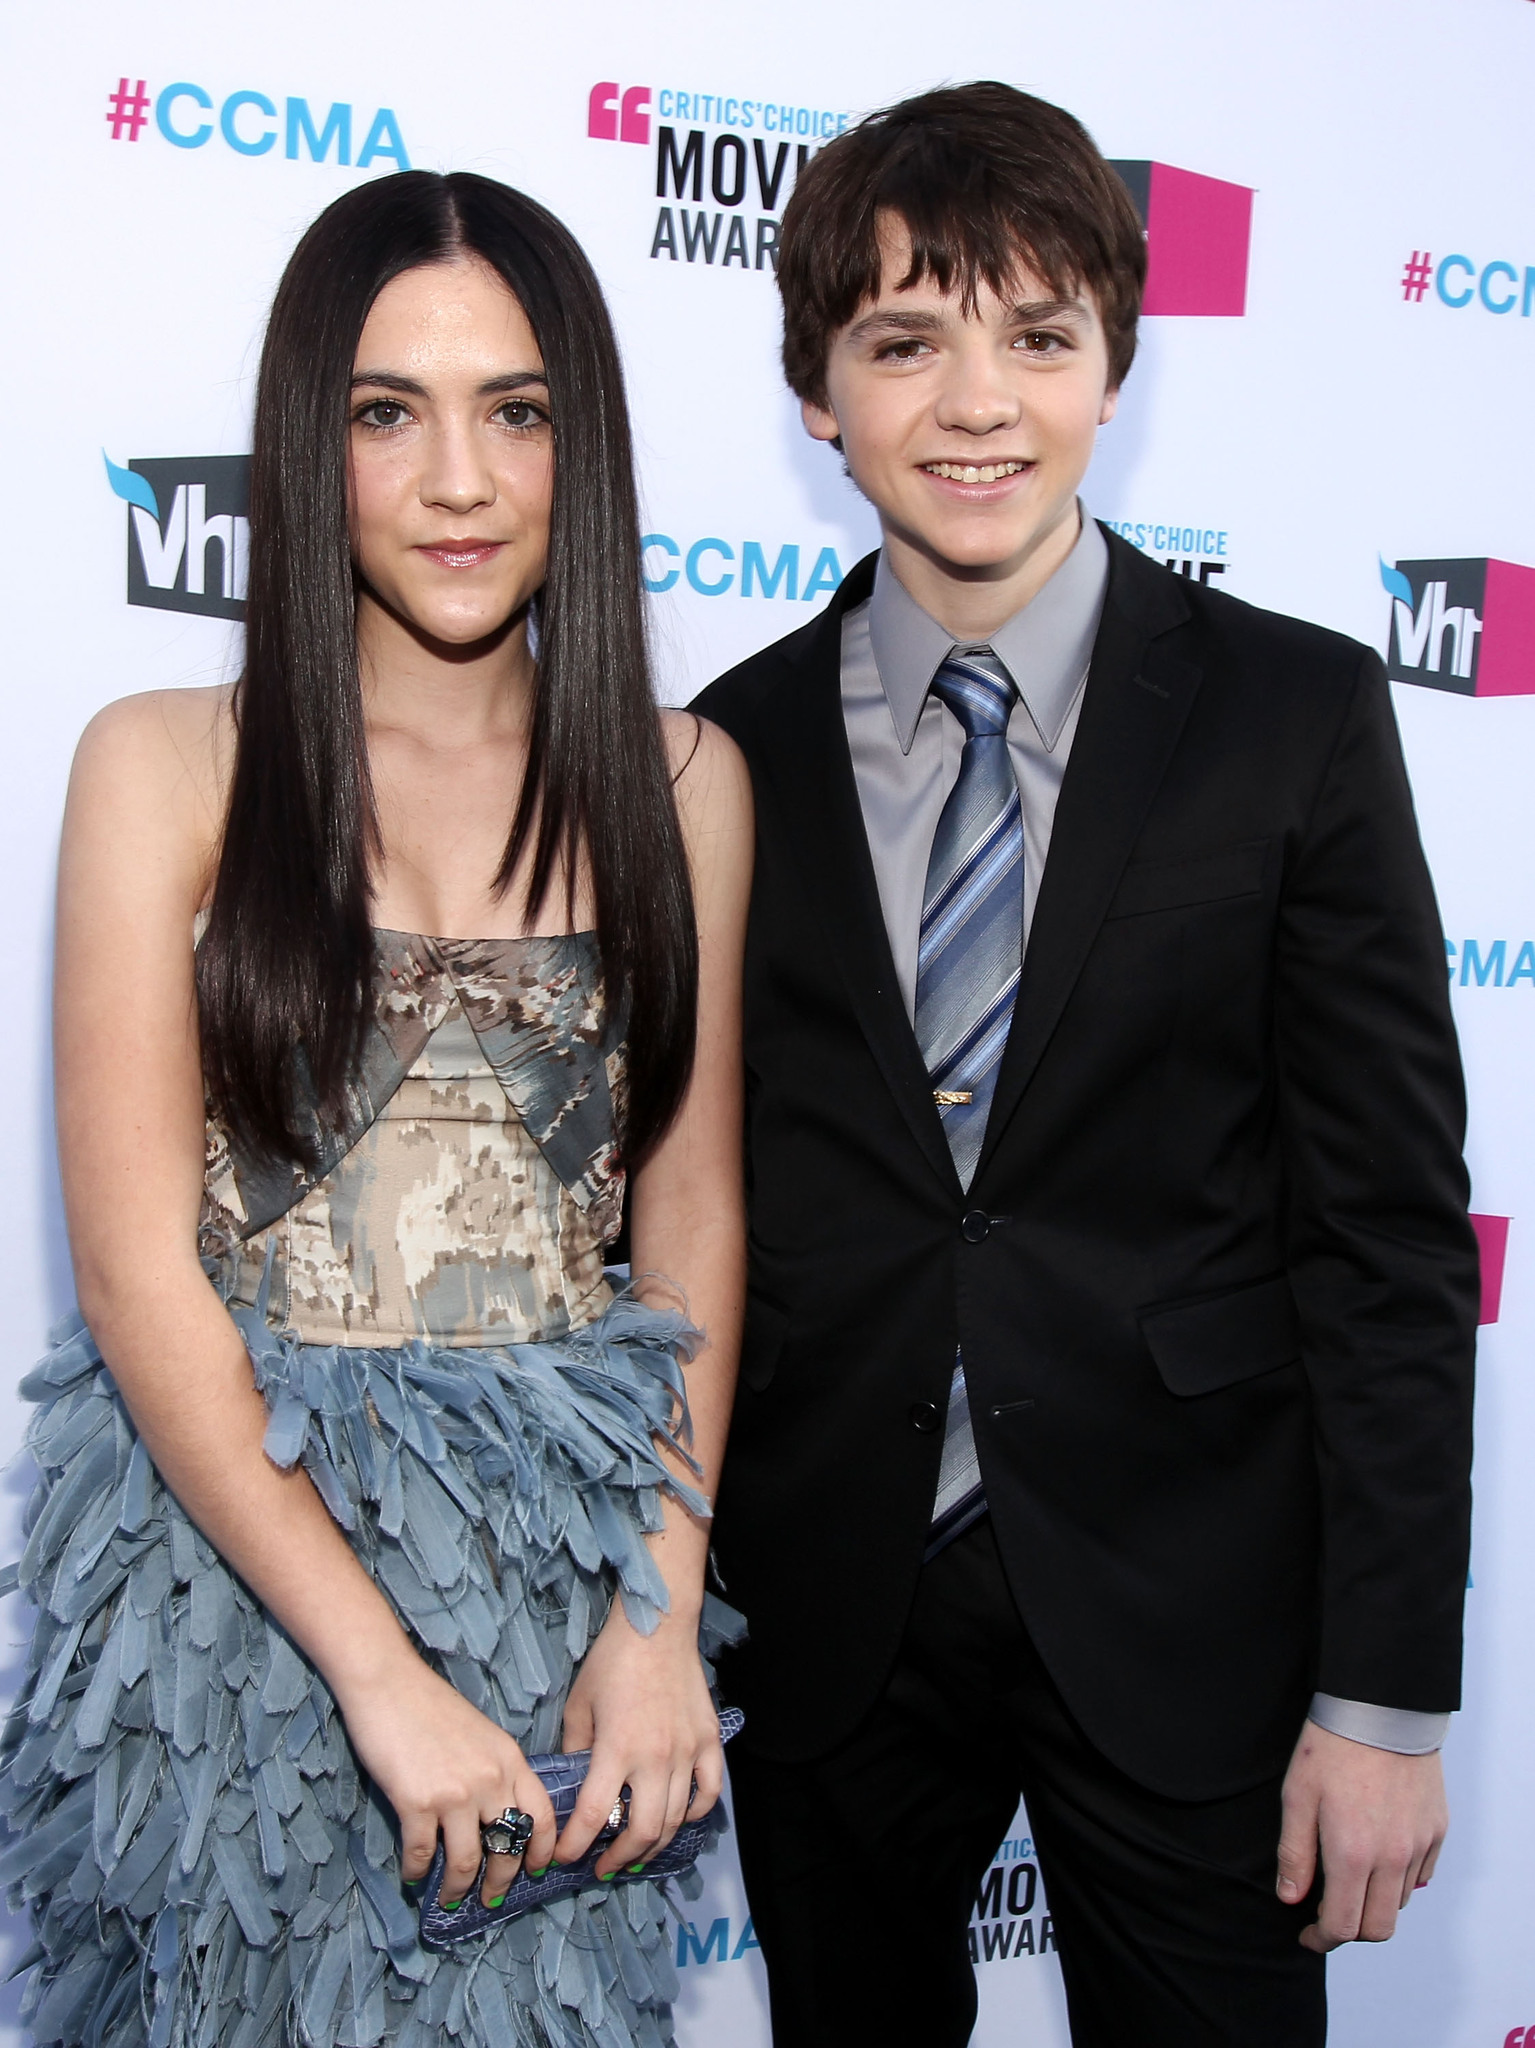 Joel Courtney and Isabelle Fuhrman